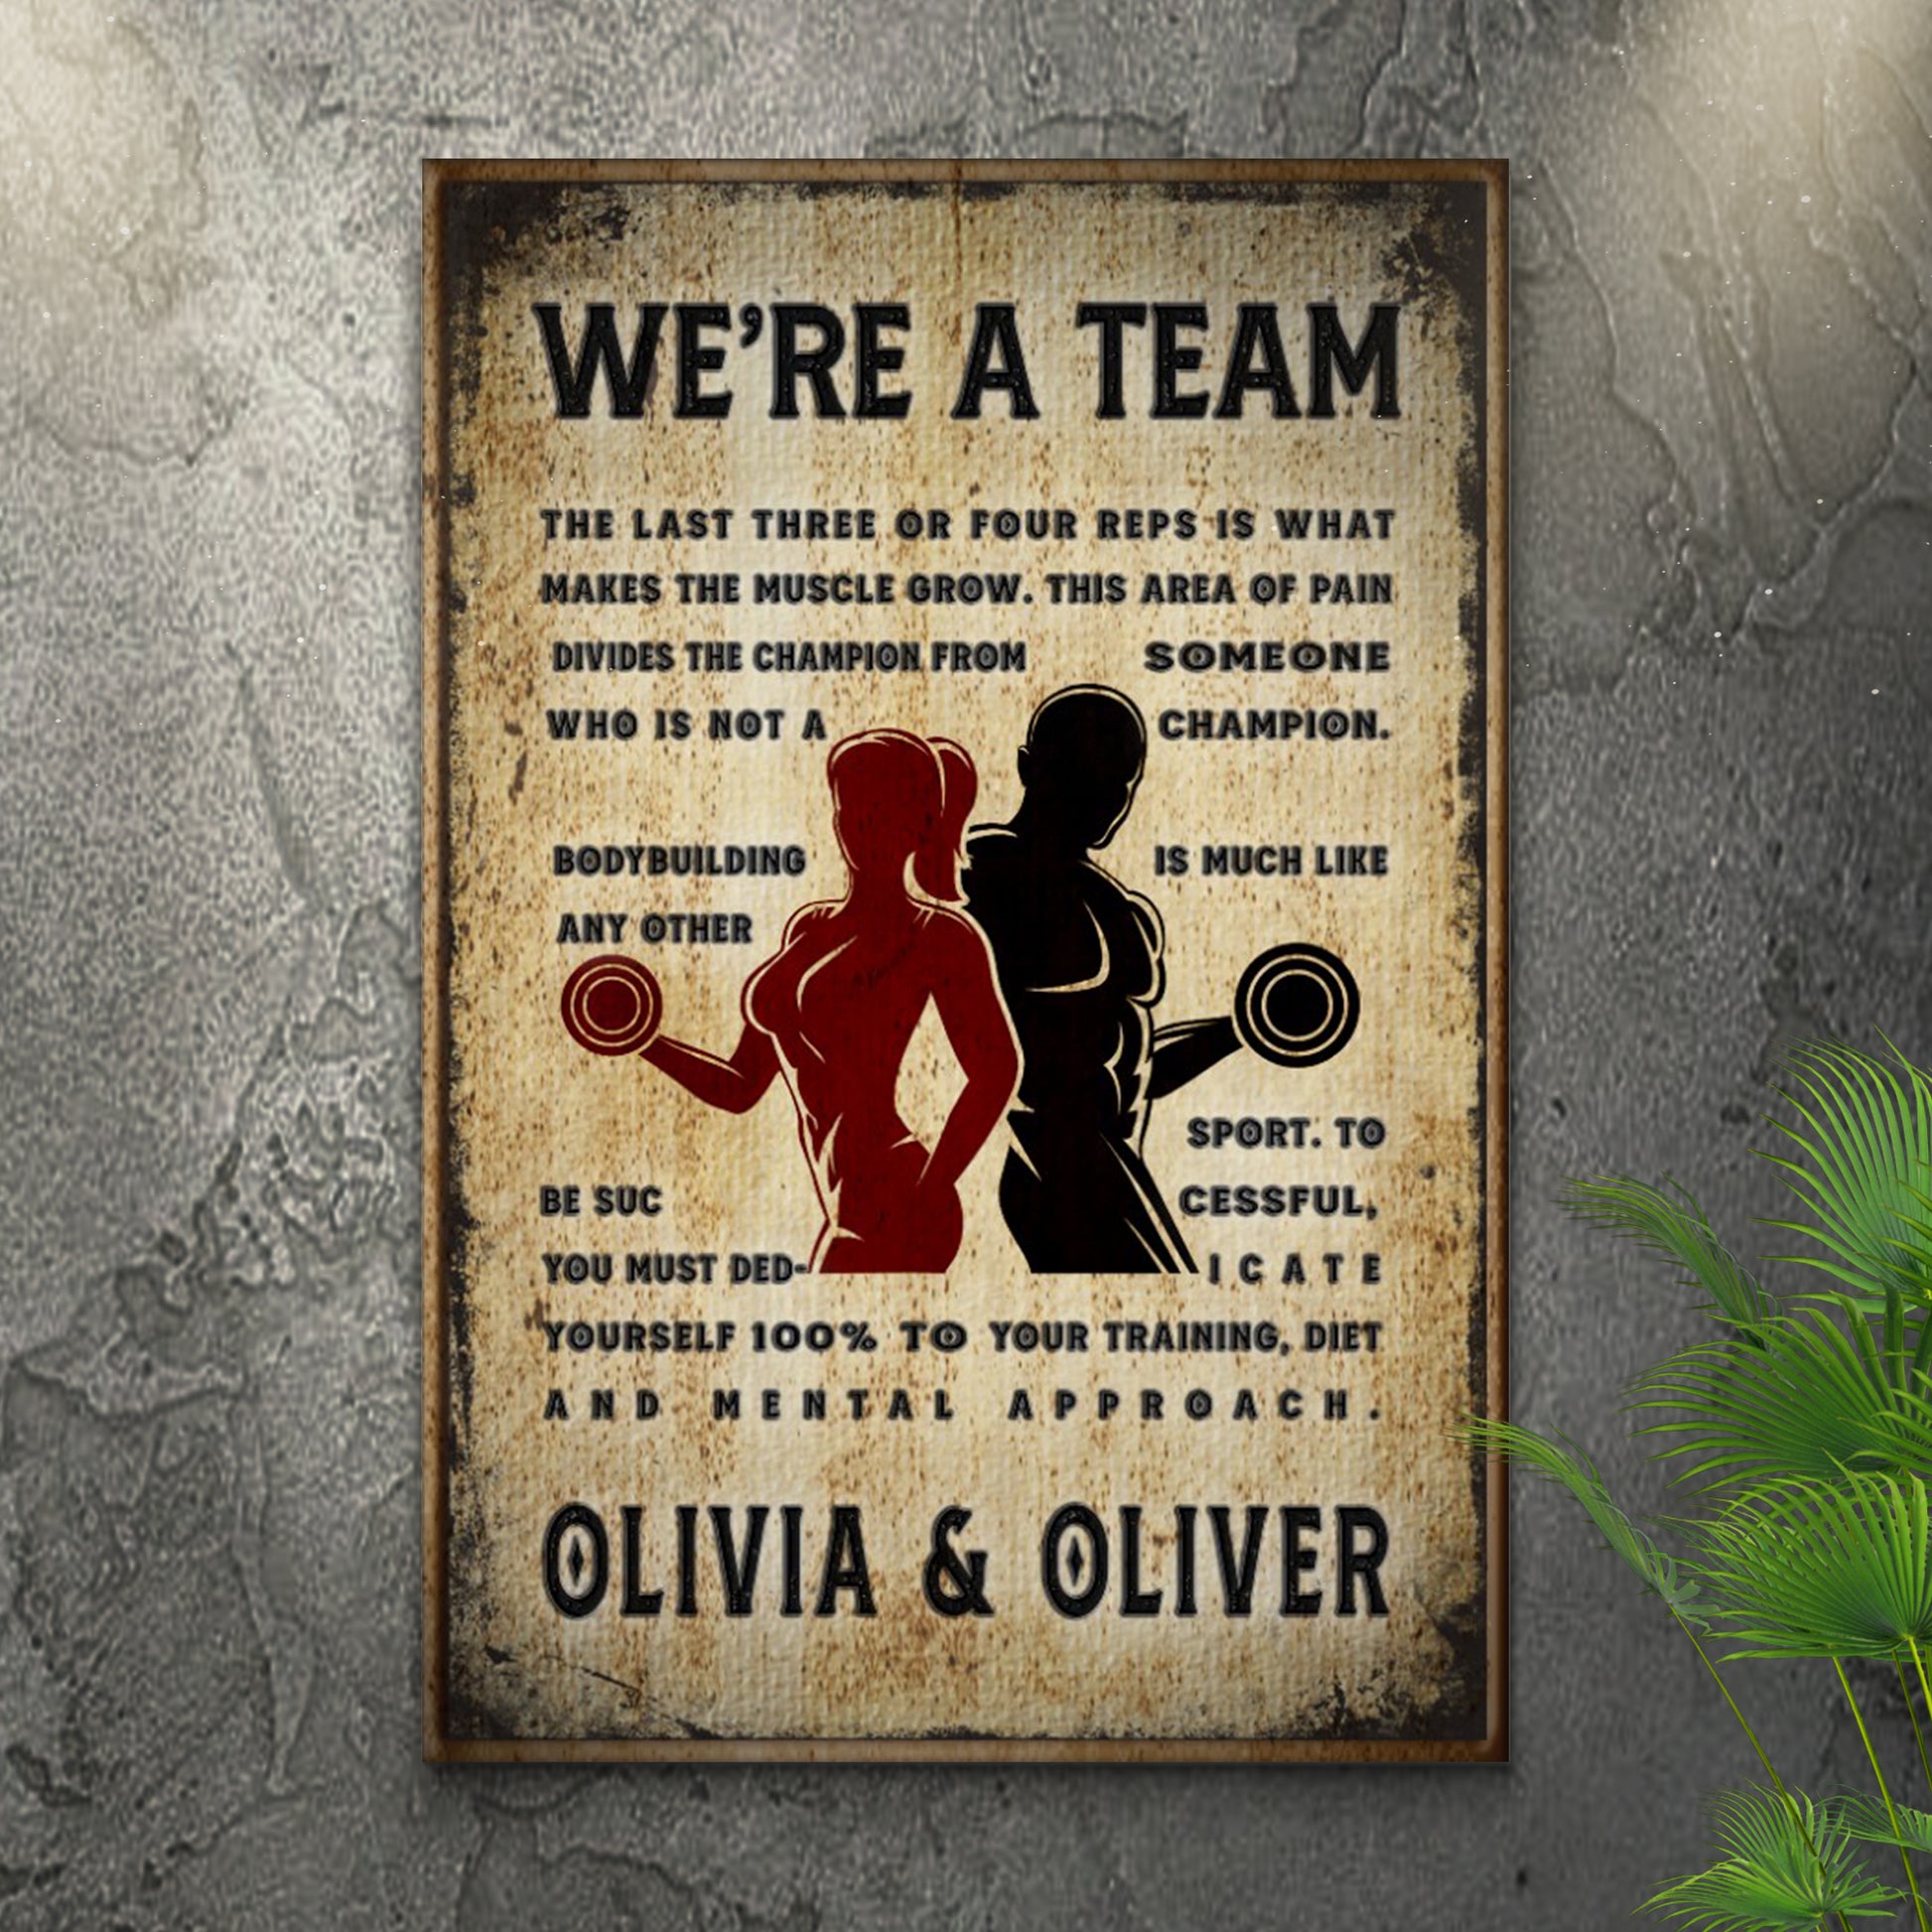 We're A Team Motivation Sign - Image by Tailored Canvases